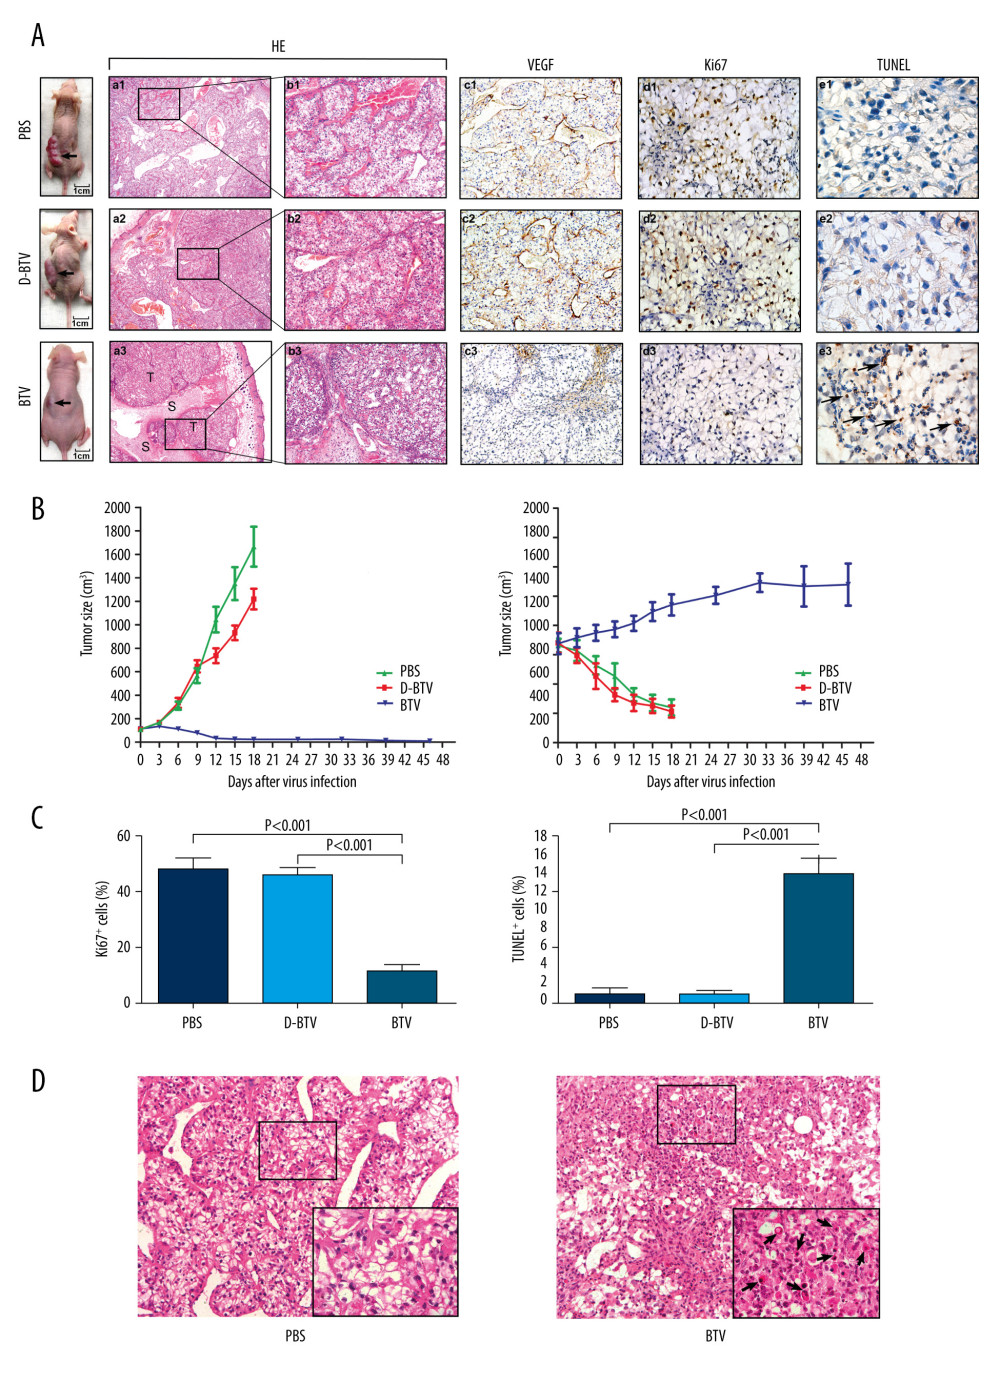 BTVs exert antitumor effects in a renal cancer OS-RC-2 xenograft mouse model. (A) Representative tumor sections from treated mice were harvested after treatment and analyzed by H&E (×40 and×100), cell proliferation (Ki67 ×400), apoptosis (TUNEL ×1000), or angiogenesis (VEGF ×200), by immunohistochemistry. The H&E staining shows that the tumor tissue had disintegrated into smaller components. T – tumor tissue, S – tumor stroma. Sinusoid-like blood vessels were occlusive, degenerated, or absent entirely. The VEGF staining showed less immunoreactivity in BTV-treated tumors than in control groups. (B) Tumor volume (mm3) was measured and the data are presented as mean±SD. Body weight was monitored continuously, and the data shown represent the mean±SD. (C) Quantification of mitotic index (left), and apoptosis (right). Labeled cells were counted in an average of 6 high-power fields. Data represent means±SEM. (D) H&E staining also revealed apoptotic-type cells, such as condensed nuclei and cytoplasm (arrow), in BTV-treated tumors.